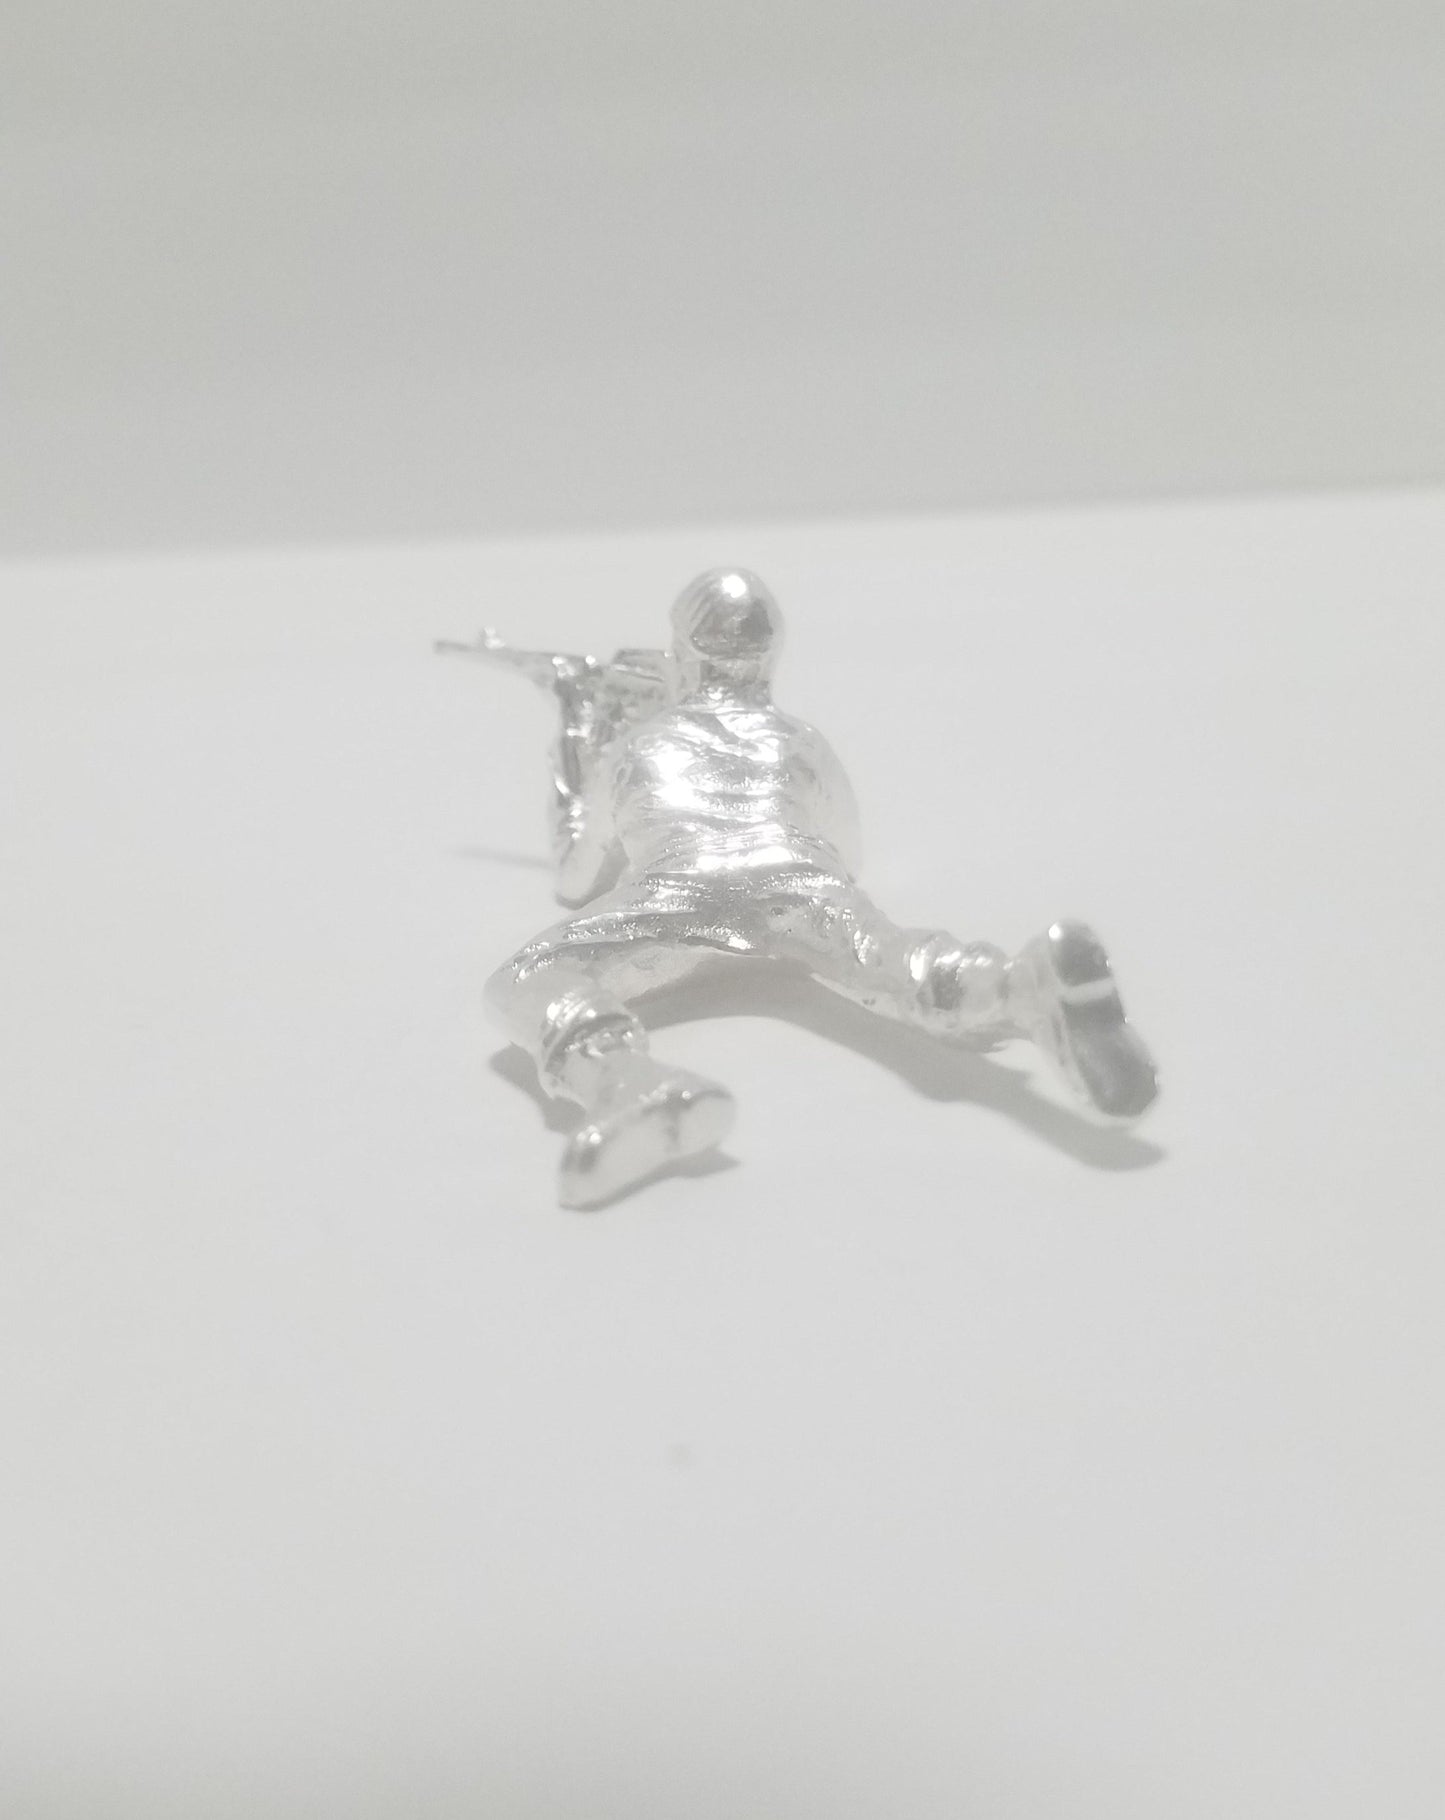 Classic Army Man Prone  Soldier 1.25 oz 999 Silver Hand Poured Bullion